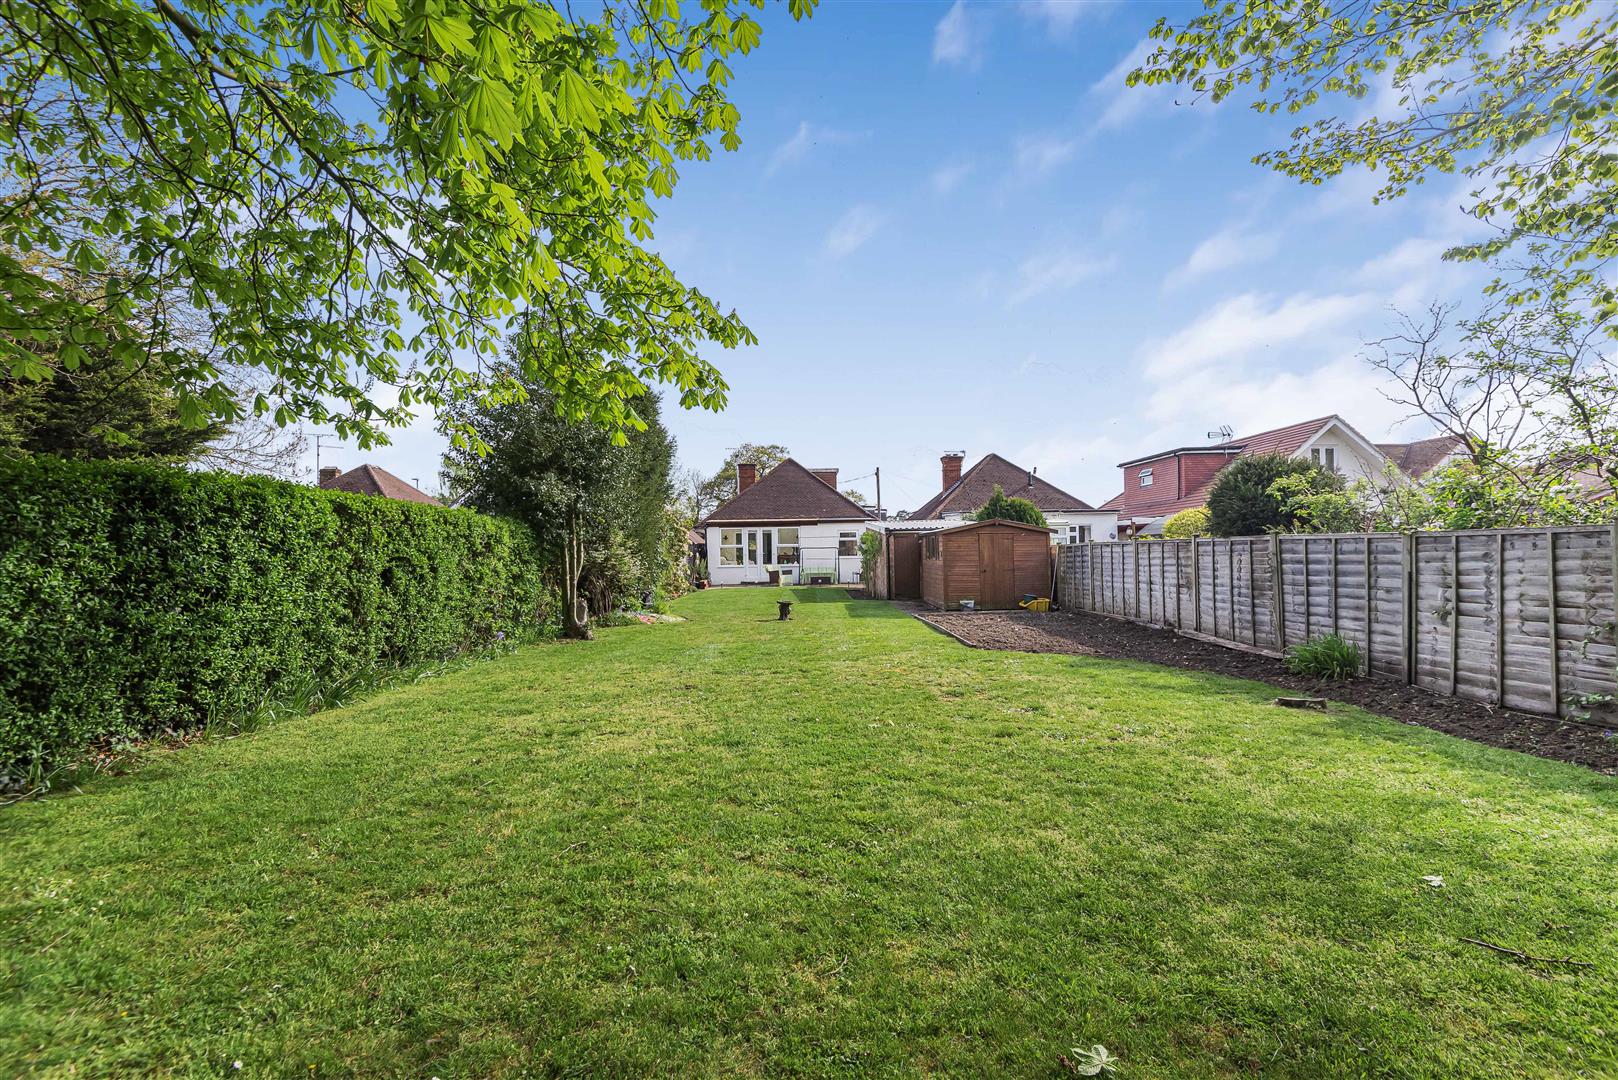 Woodlands Avenue Woodley house for sale in Reading